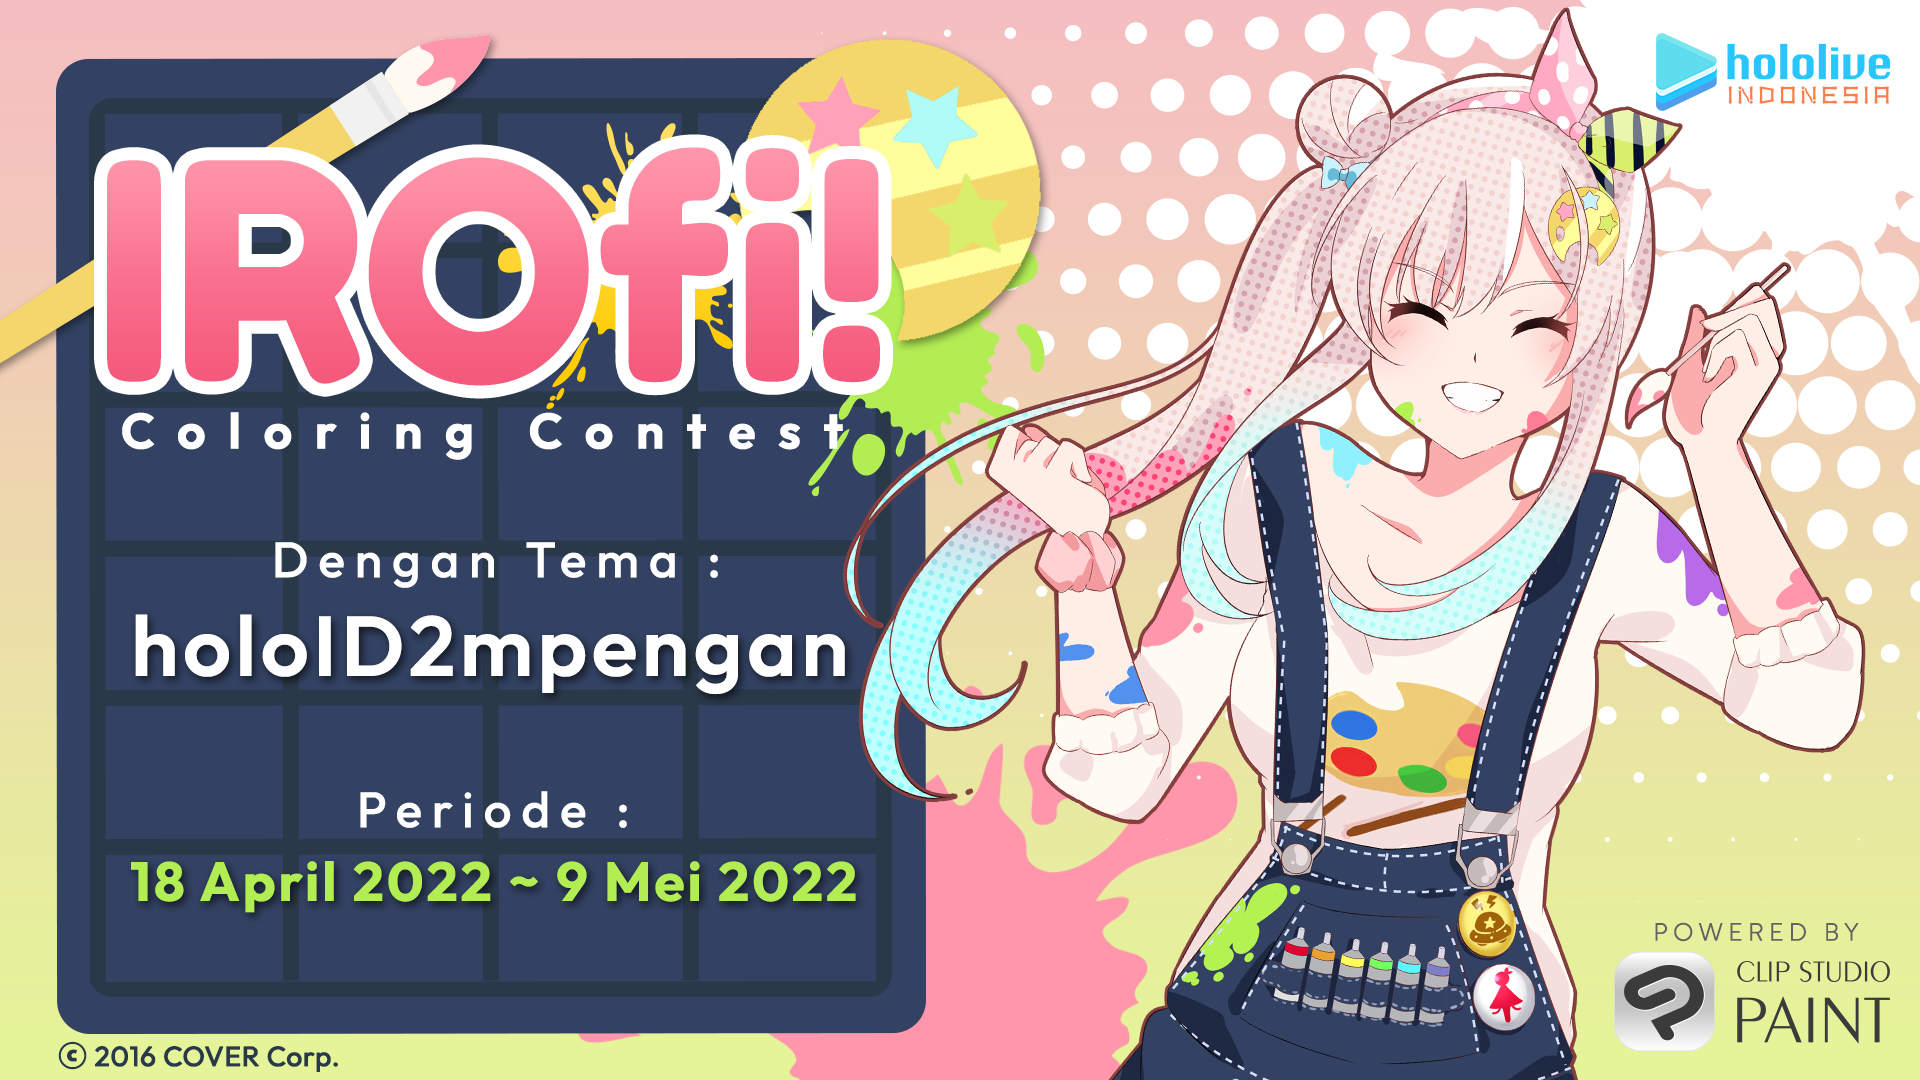 Clip Studio Paint to sponsor coloring contest held by hololive Indonesia VTuber Airani Iofifteen